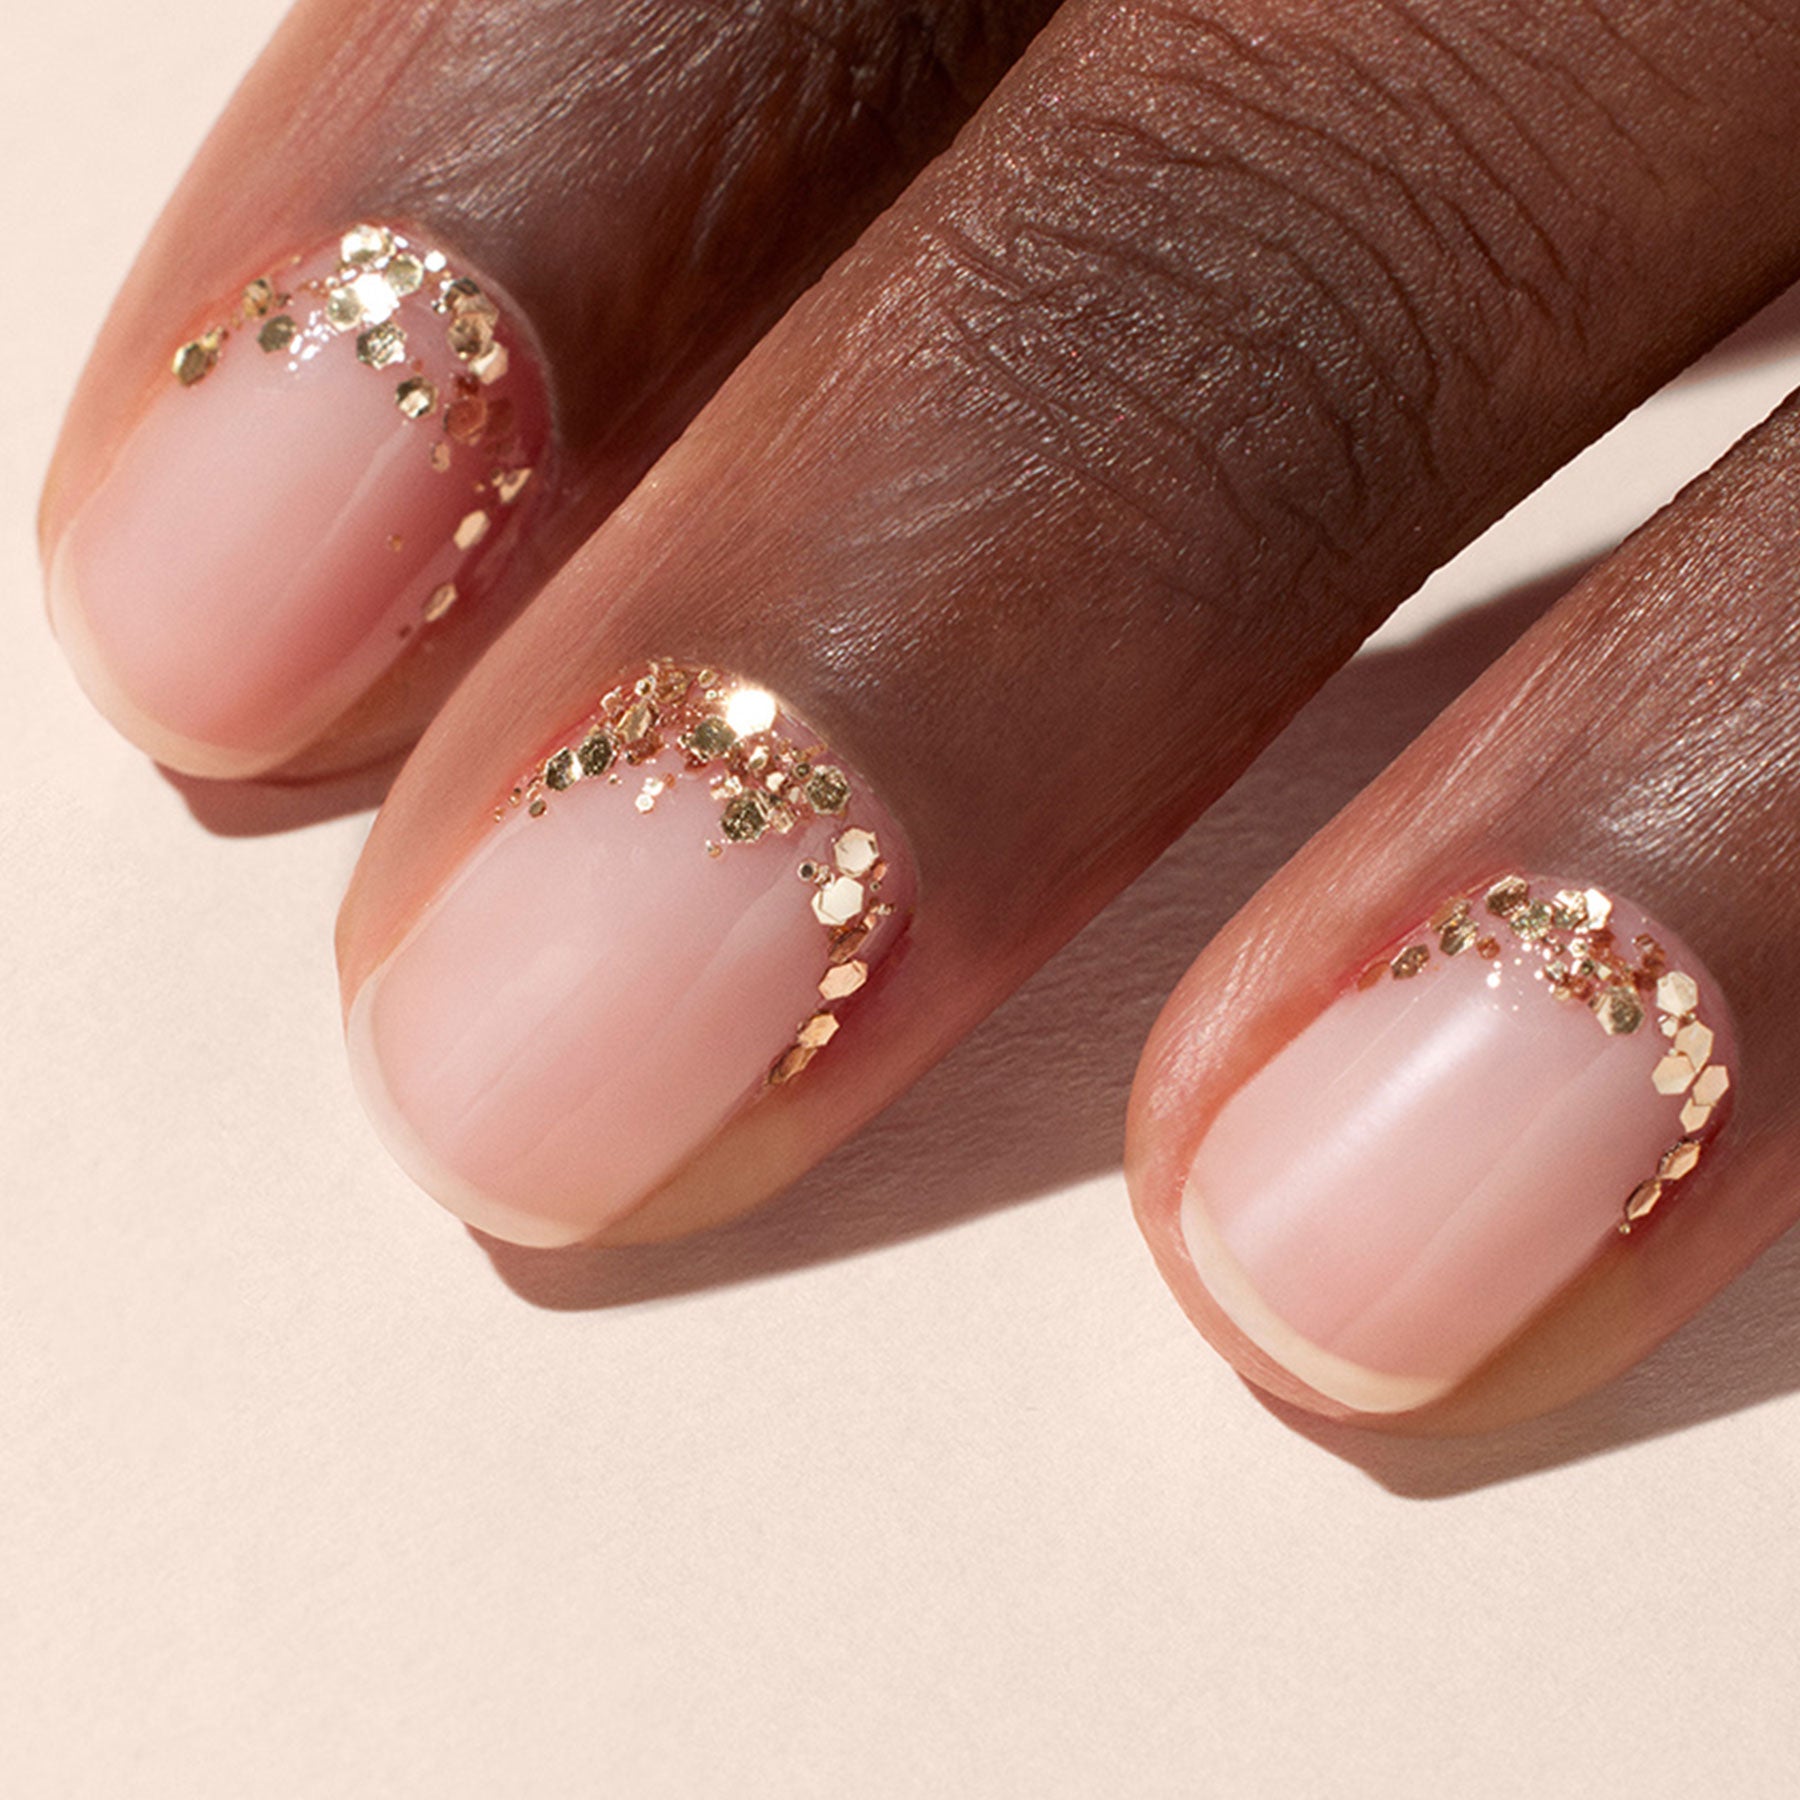 Simply Elegant Short Oval Beige Press-On Nails with Rose Gold Tips –  RainyRoses